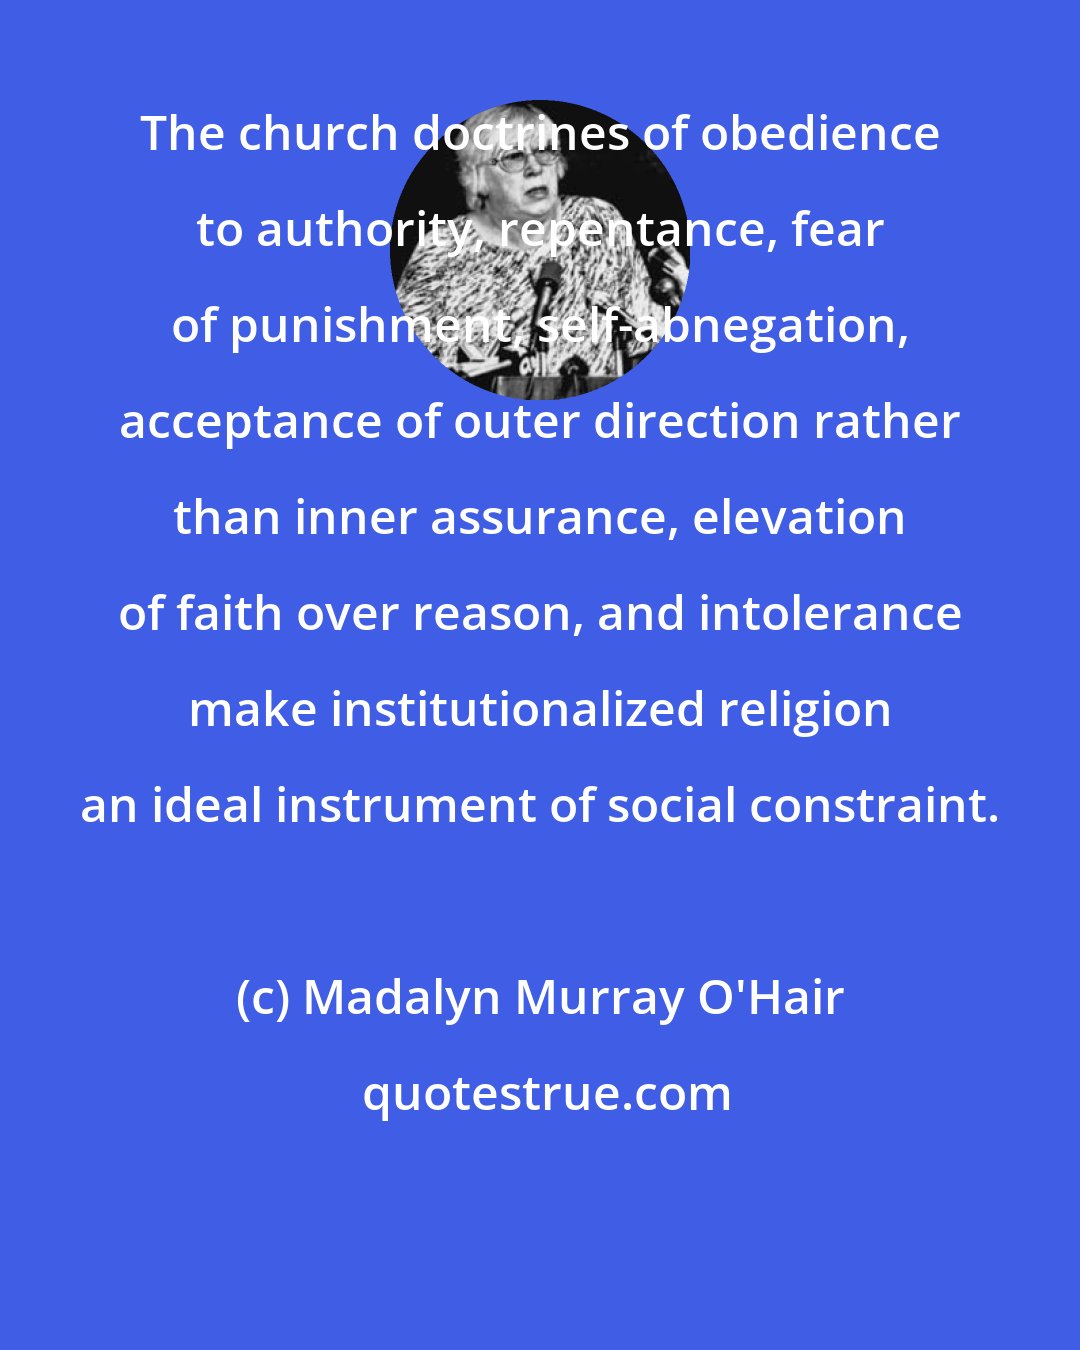 Madalyn Murray O'Hair: The church doctrines of obedience to authority, repentance, fear of punishment, self-abnegation, acceptance of outer direction rather than inner assurance, elevation of faith over reason, and intolerance make institutionalized religion an ideal instrument of social constraint.